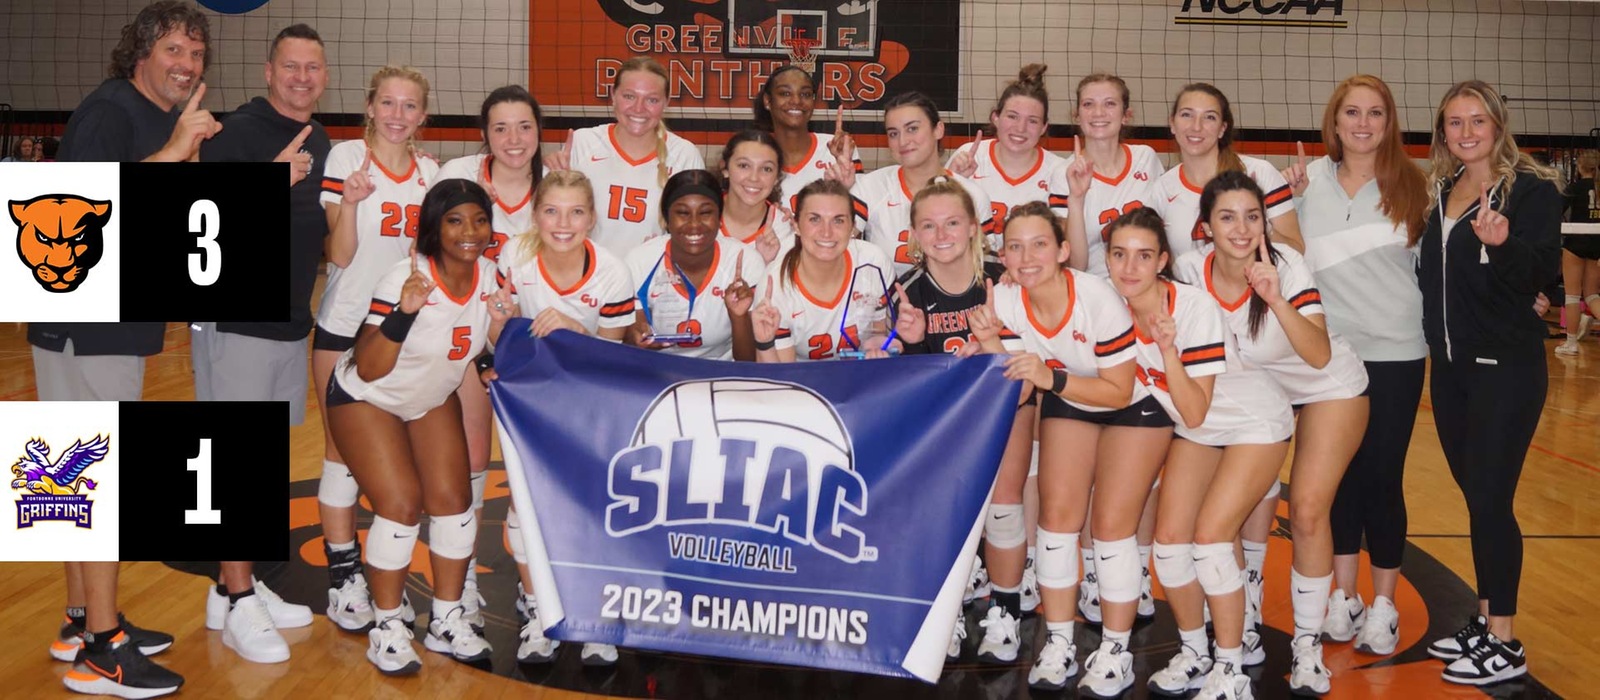 Women's volleyball punches ticket to nationals